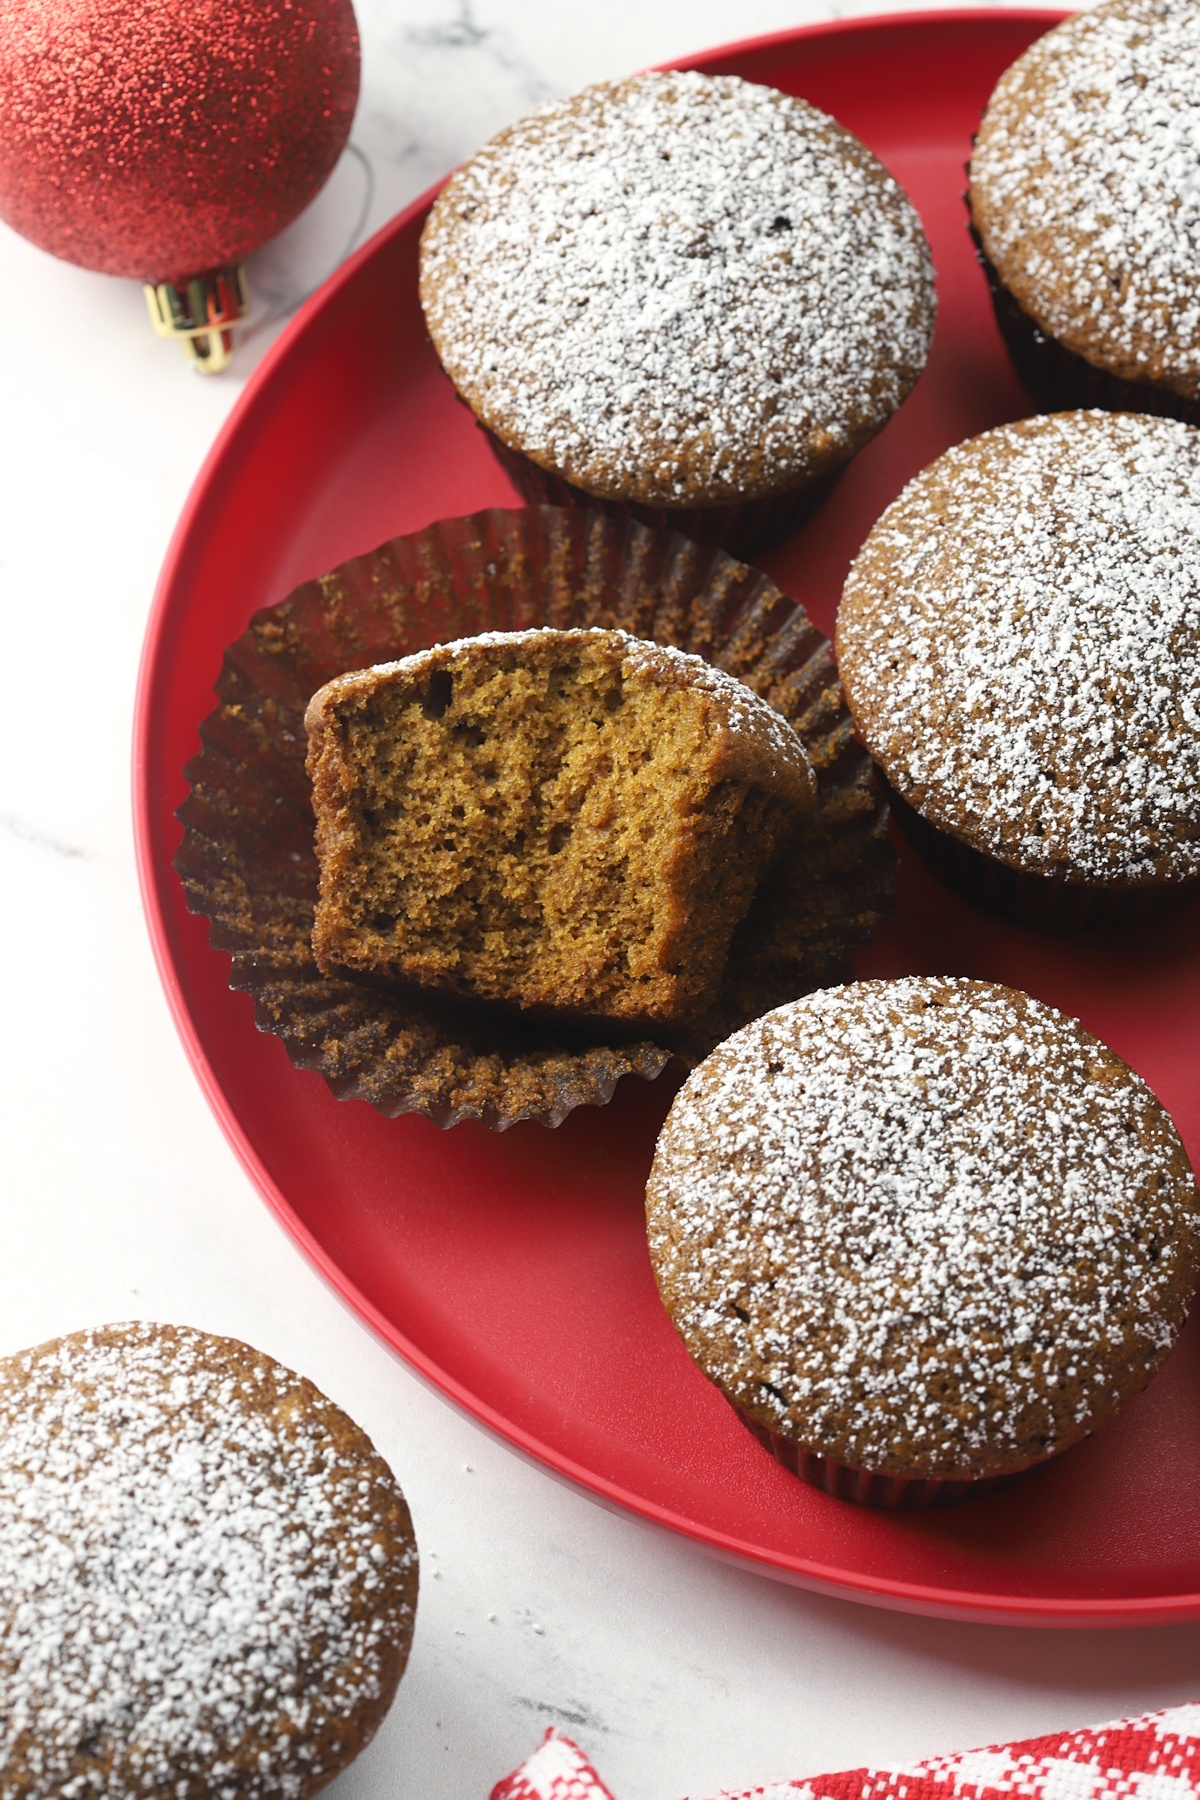 Gingerbread muffins on a red plate.